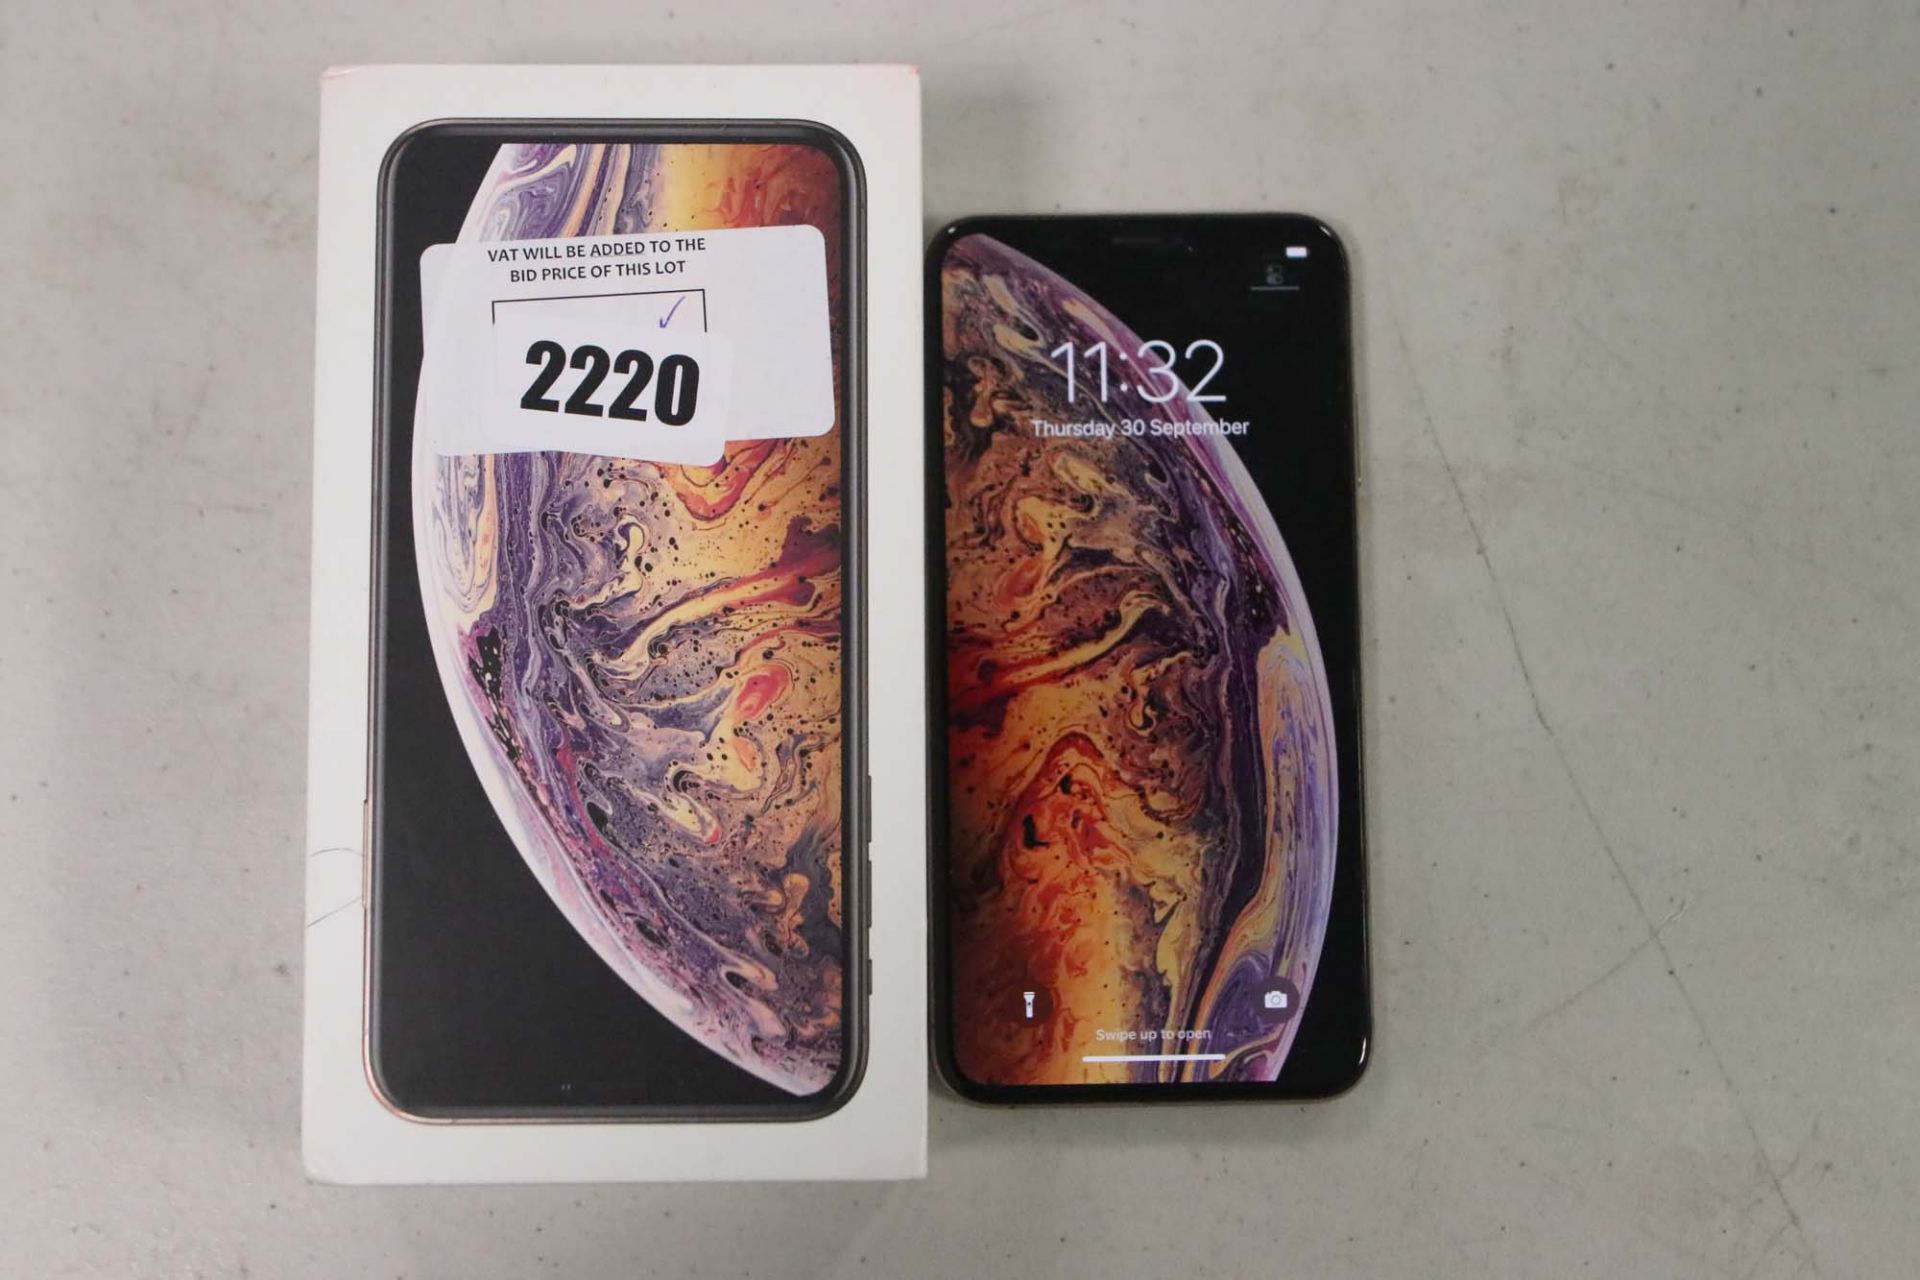 Apple iPhone XS Max in gold 64gb model A2101 with box